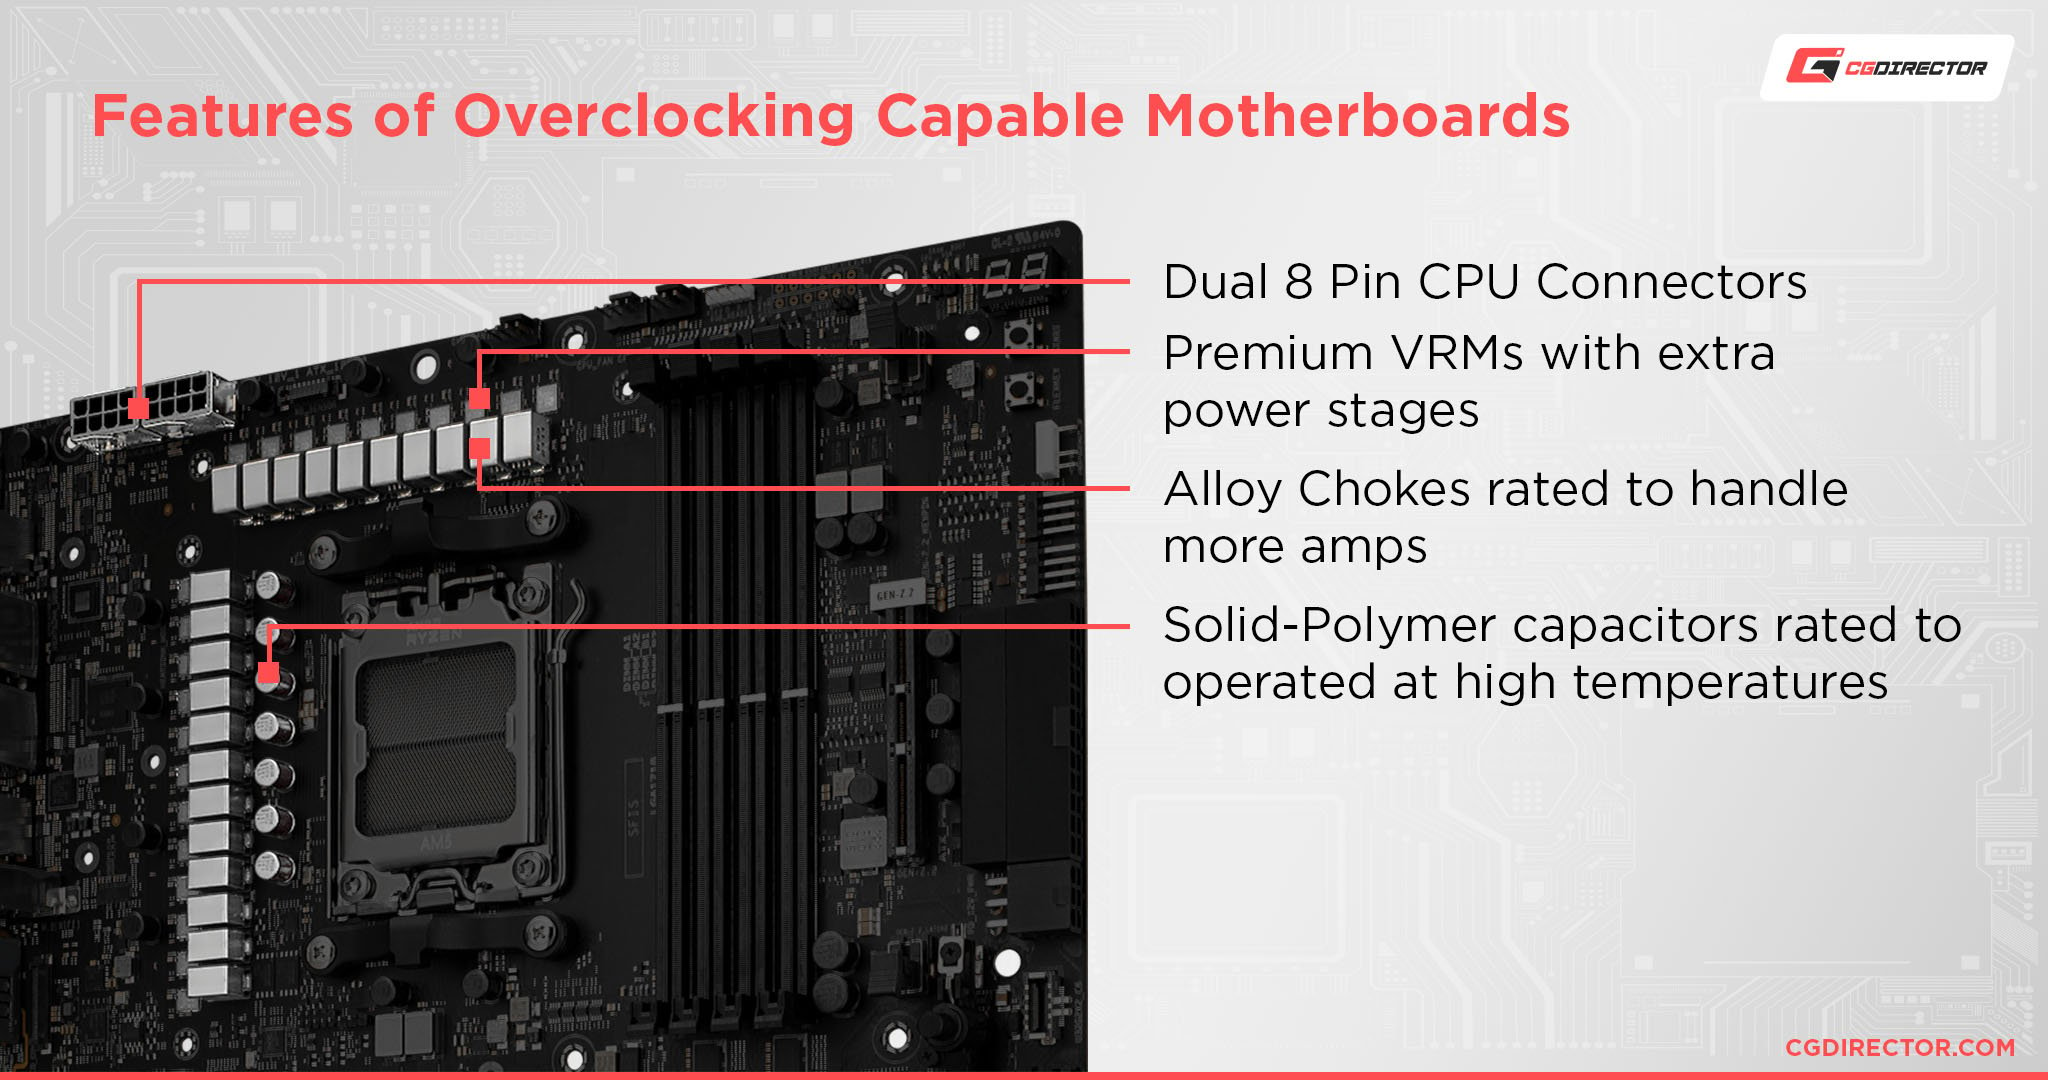 Features of Overclocking Capable Motherboards